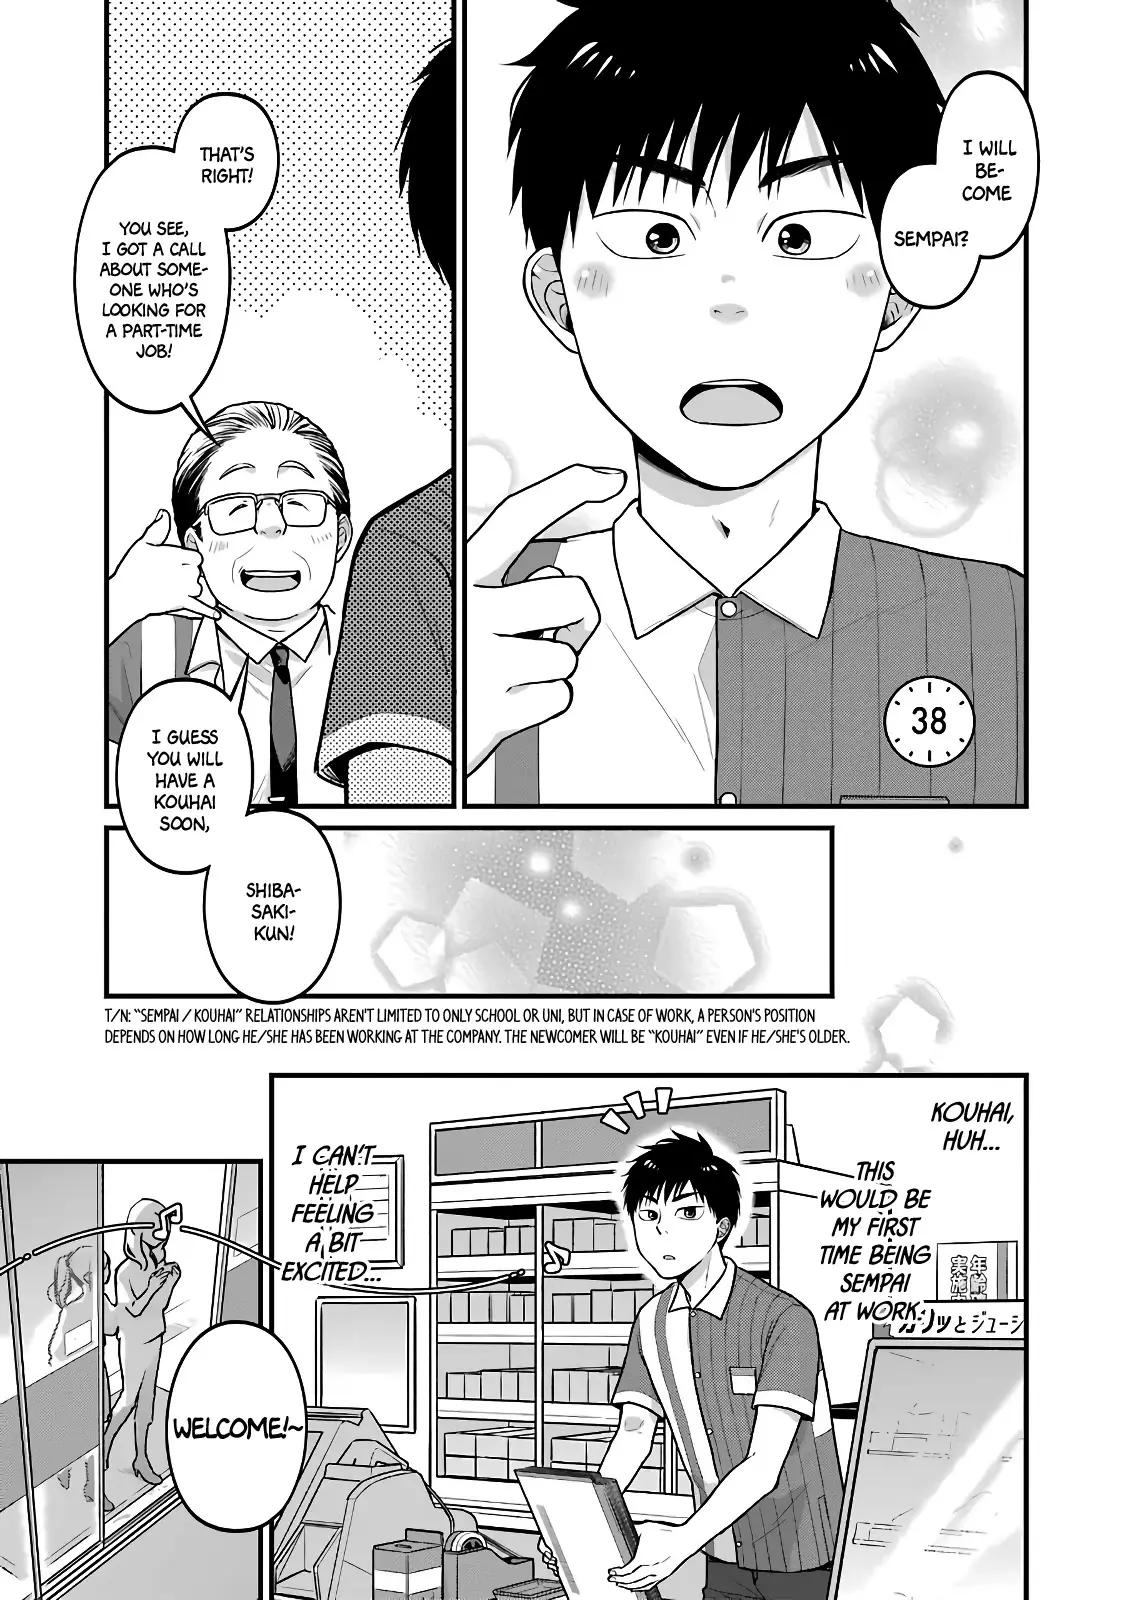 5 Minutes With You At A Convenience Store - 38 page 1-ecc7bd91